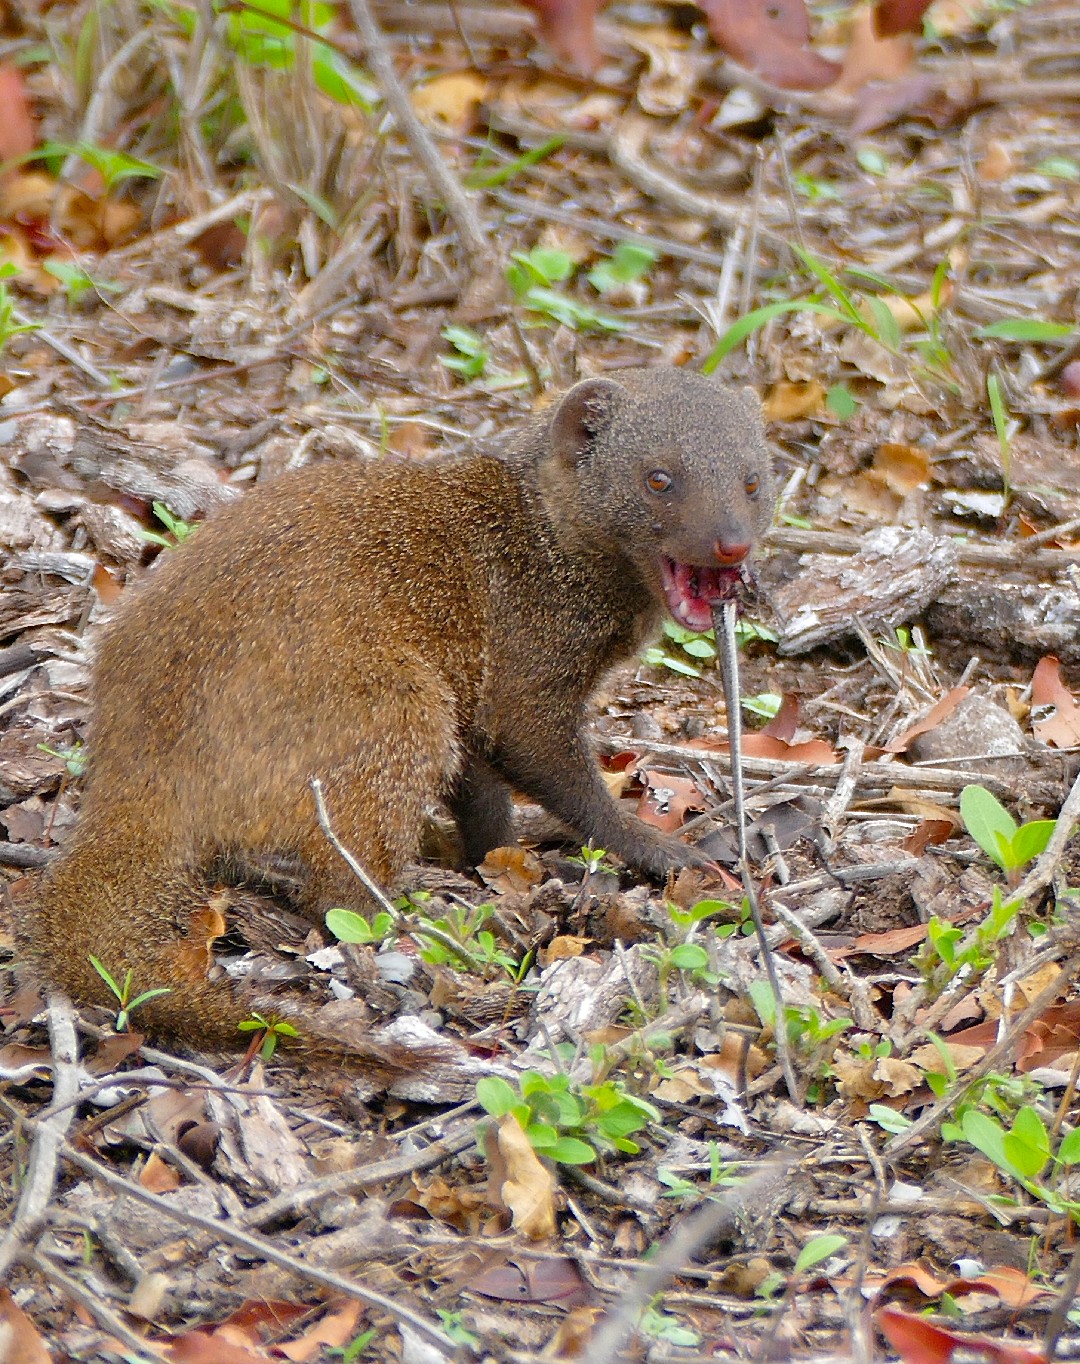 African dwarf mongooses (Helogale)